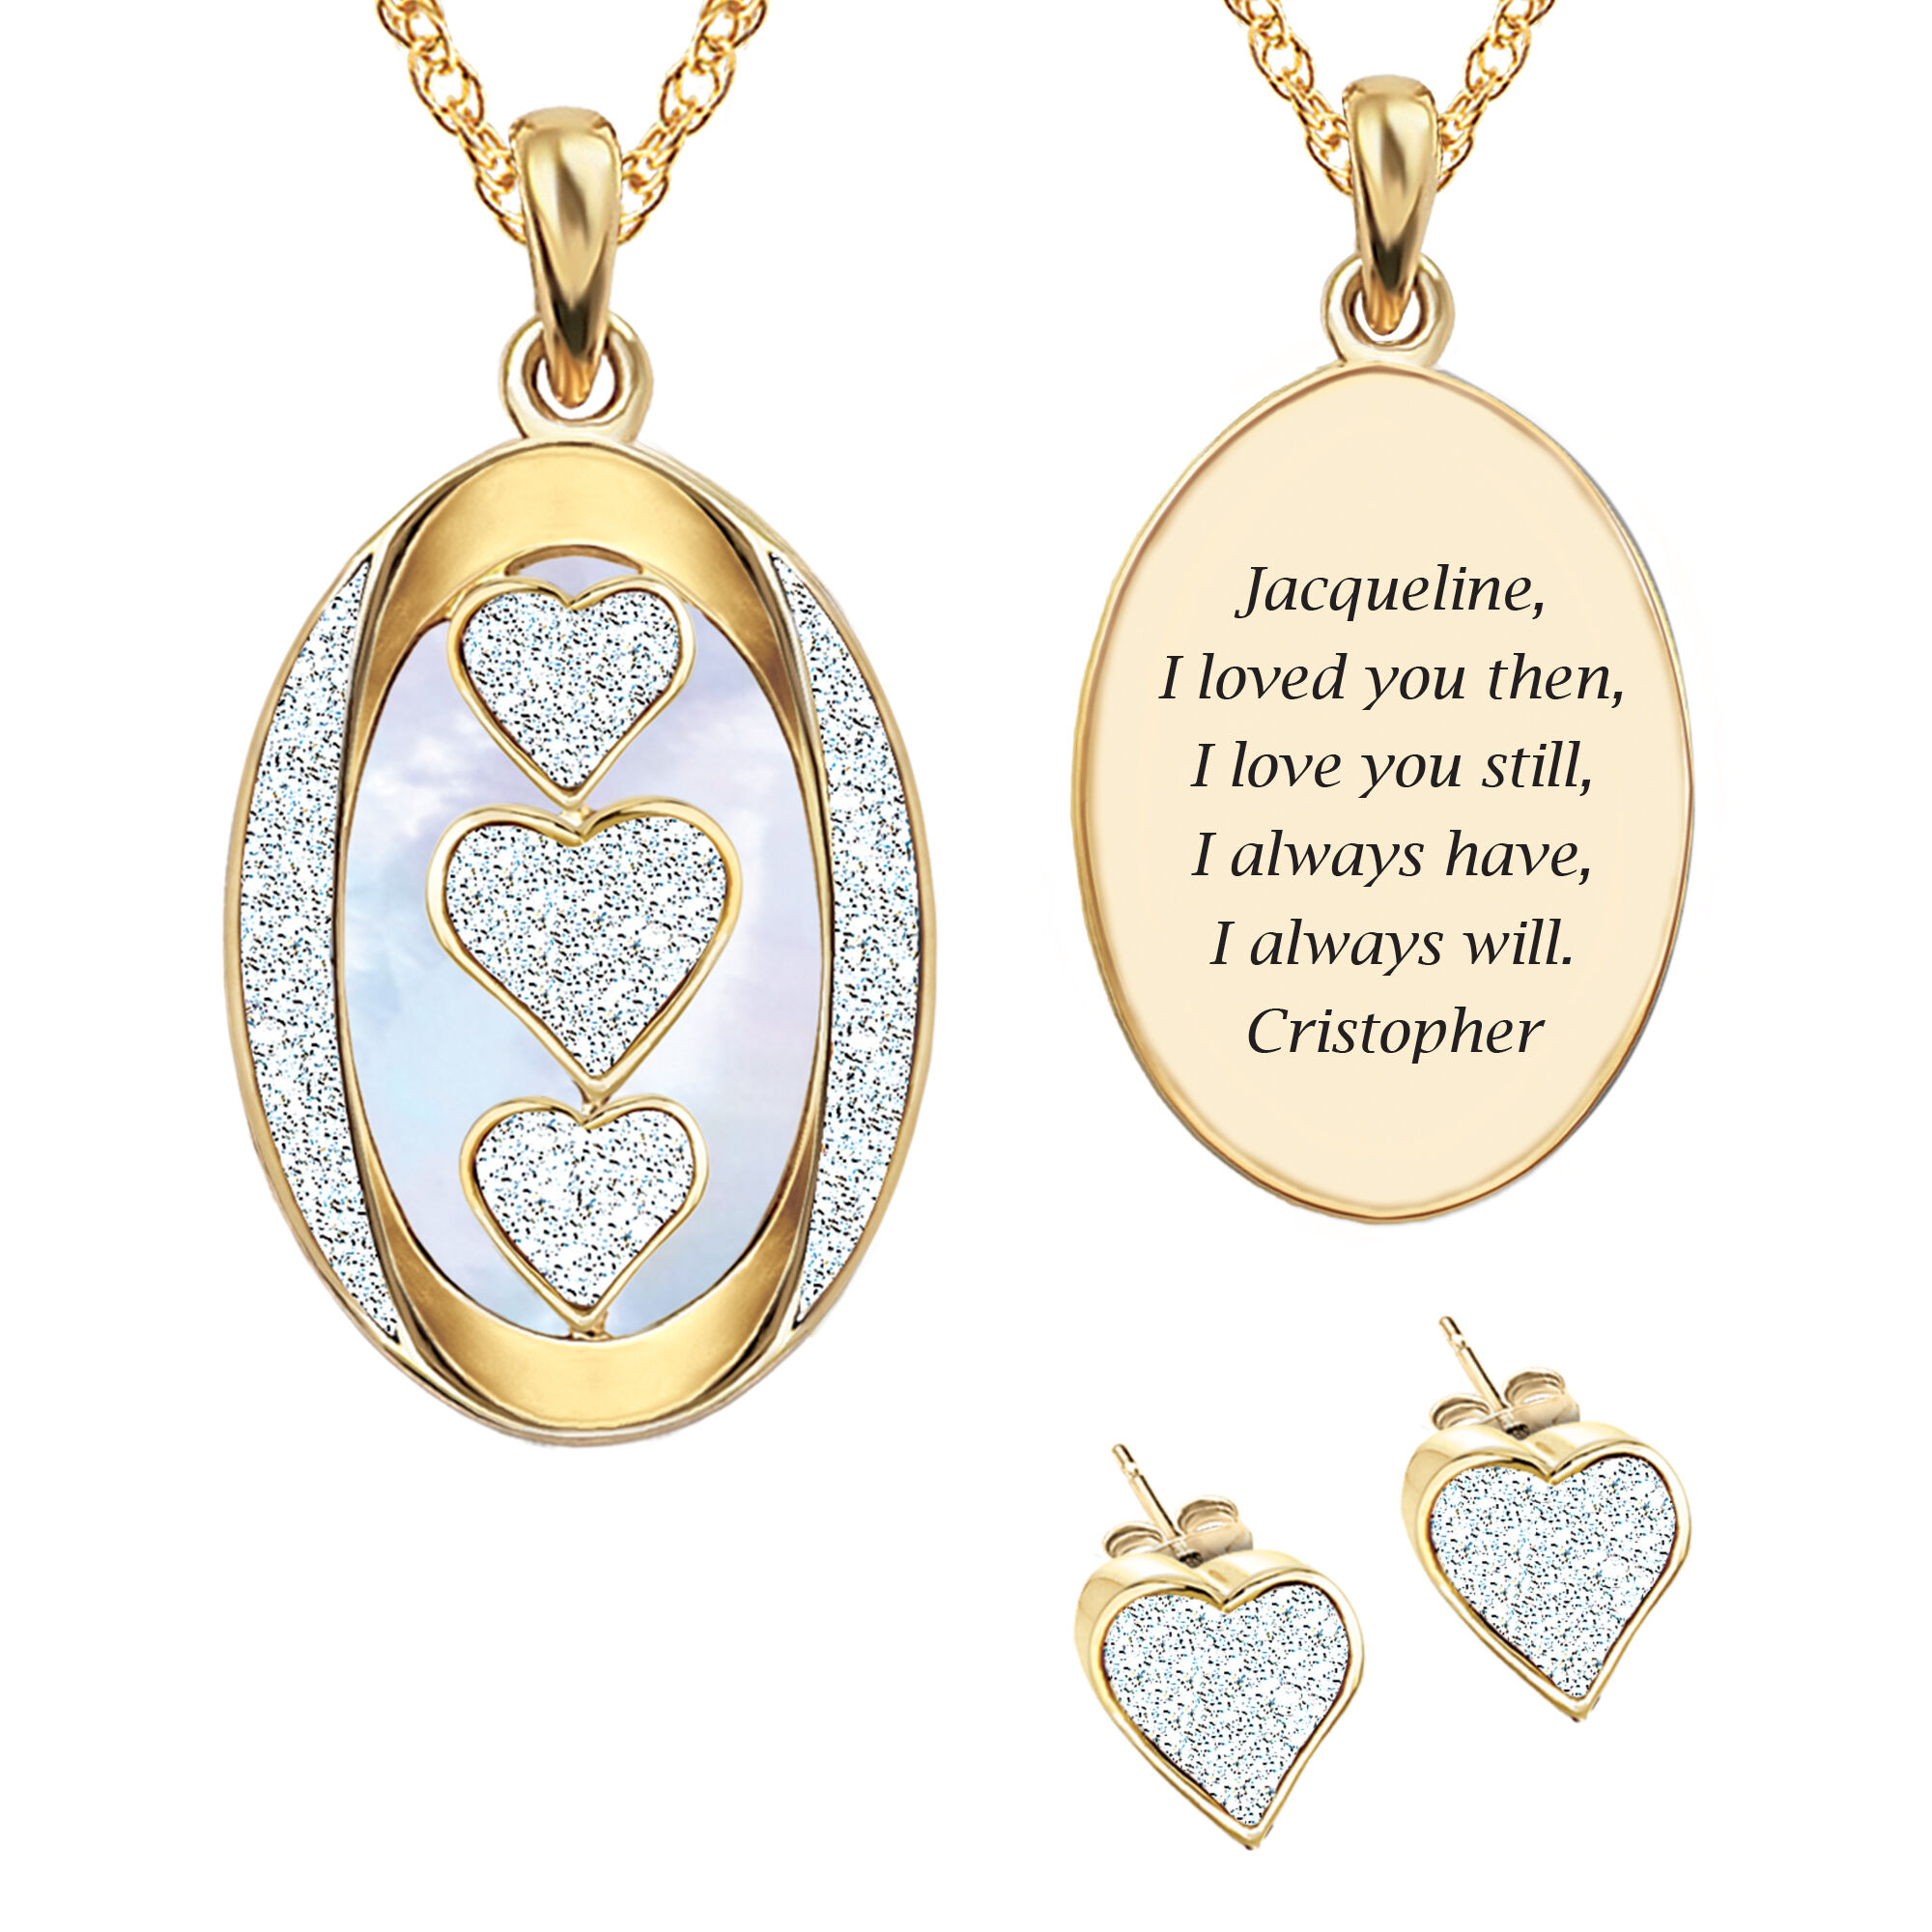 I Love You Personalized Diamond Pendant with FREE Matching Earrings 5238 0250 a main